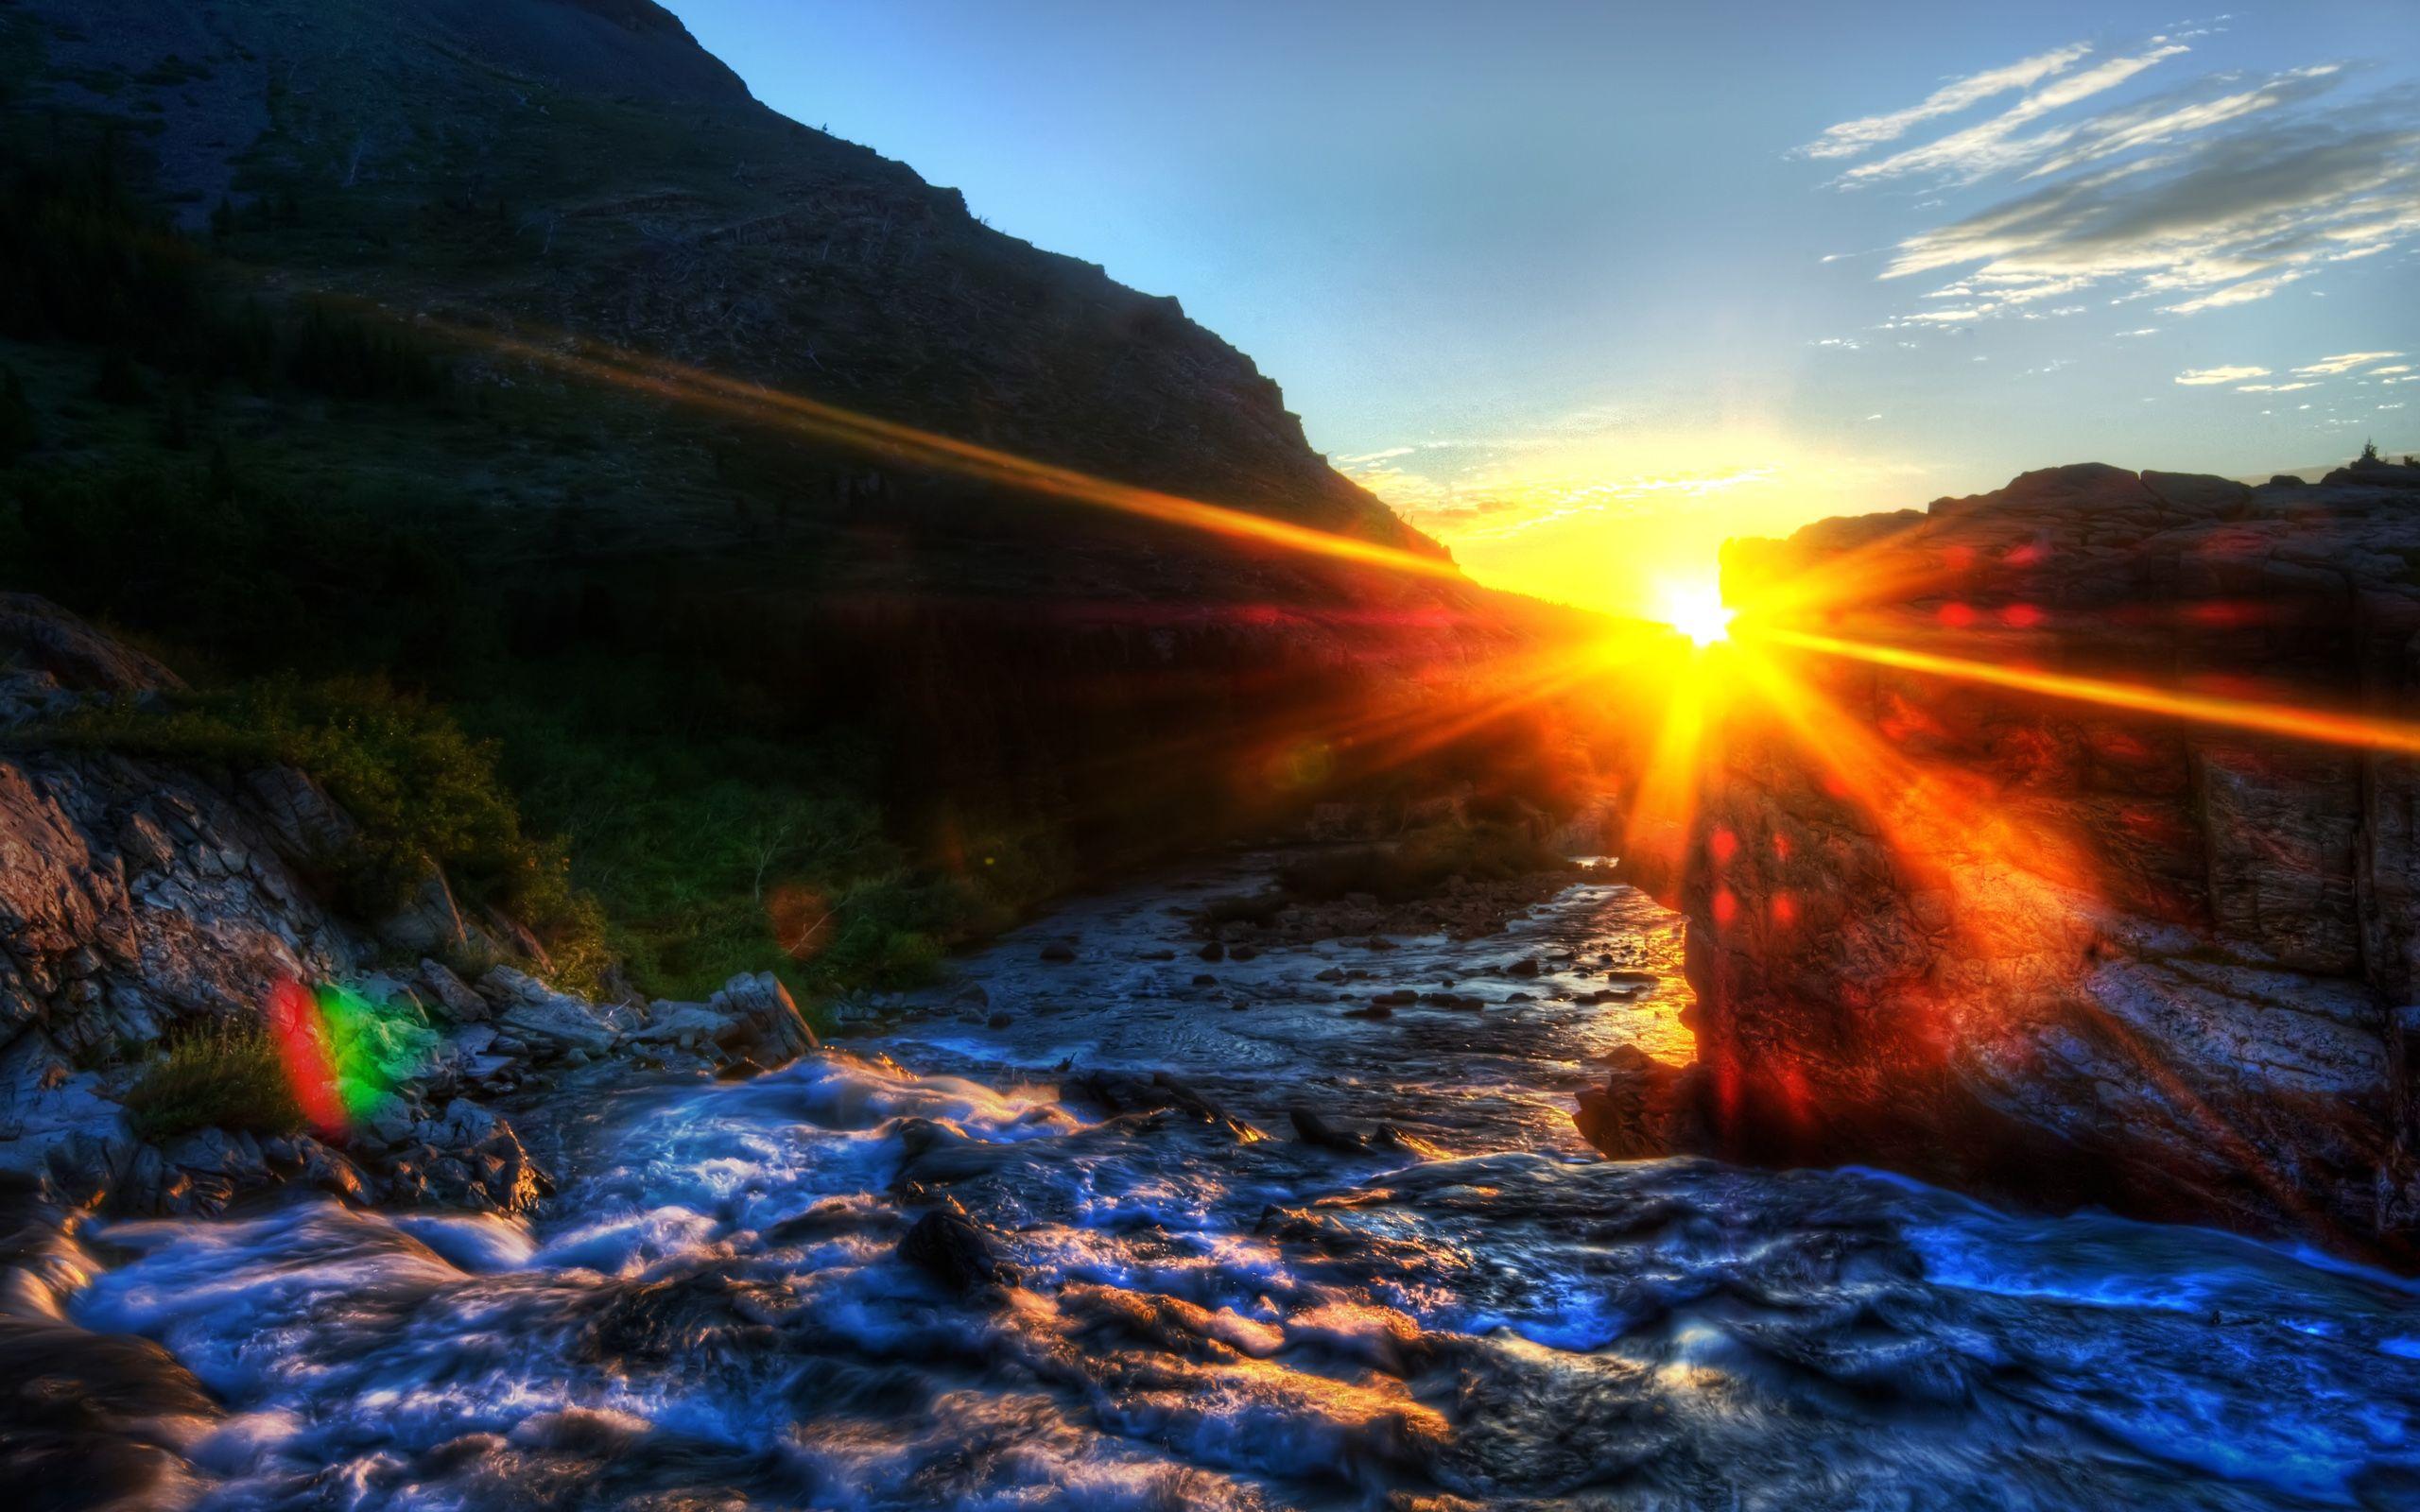 Cool Morning in Glacier National Park widescreen wallpaper. Wide